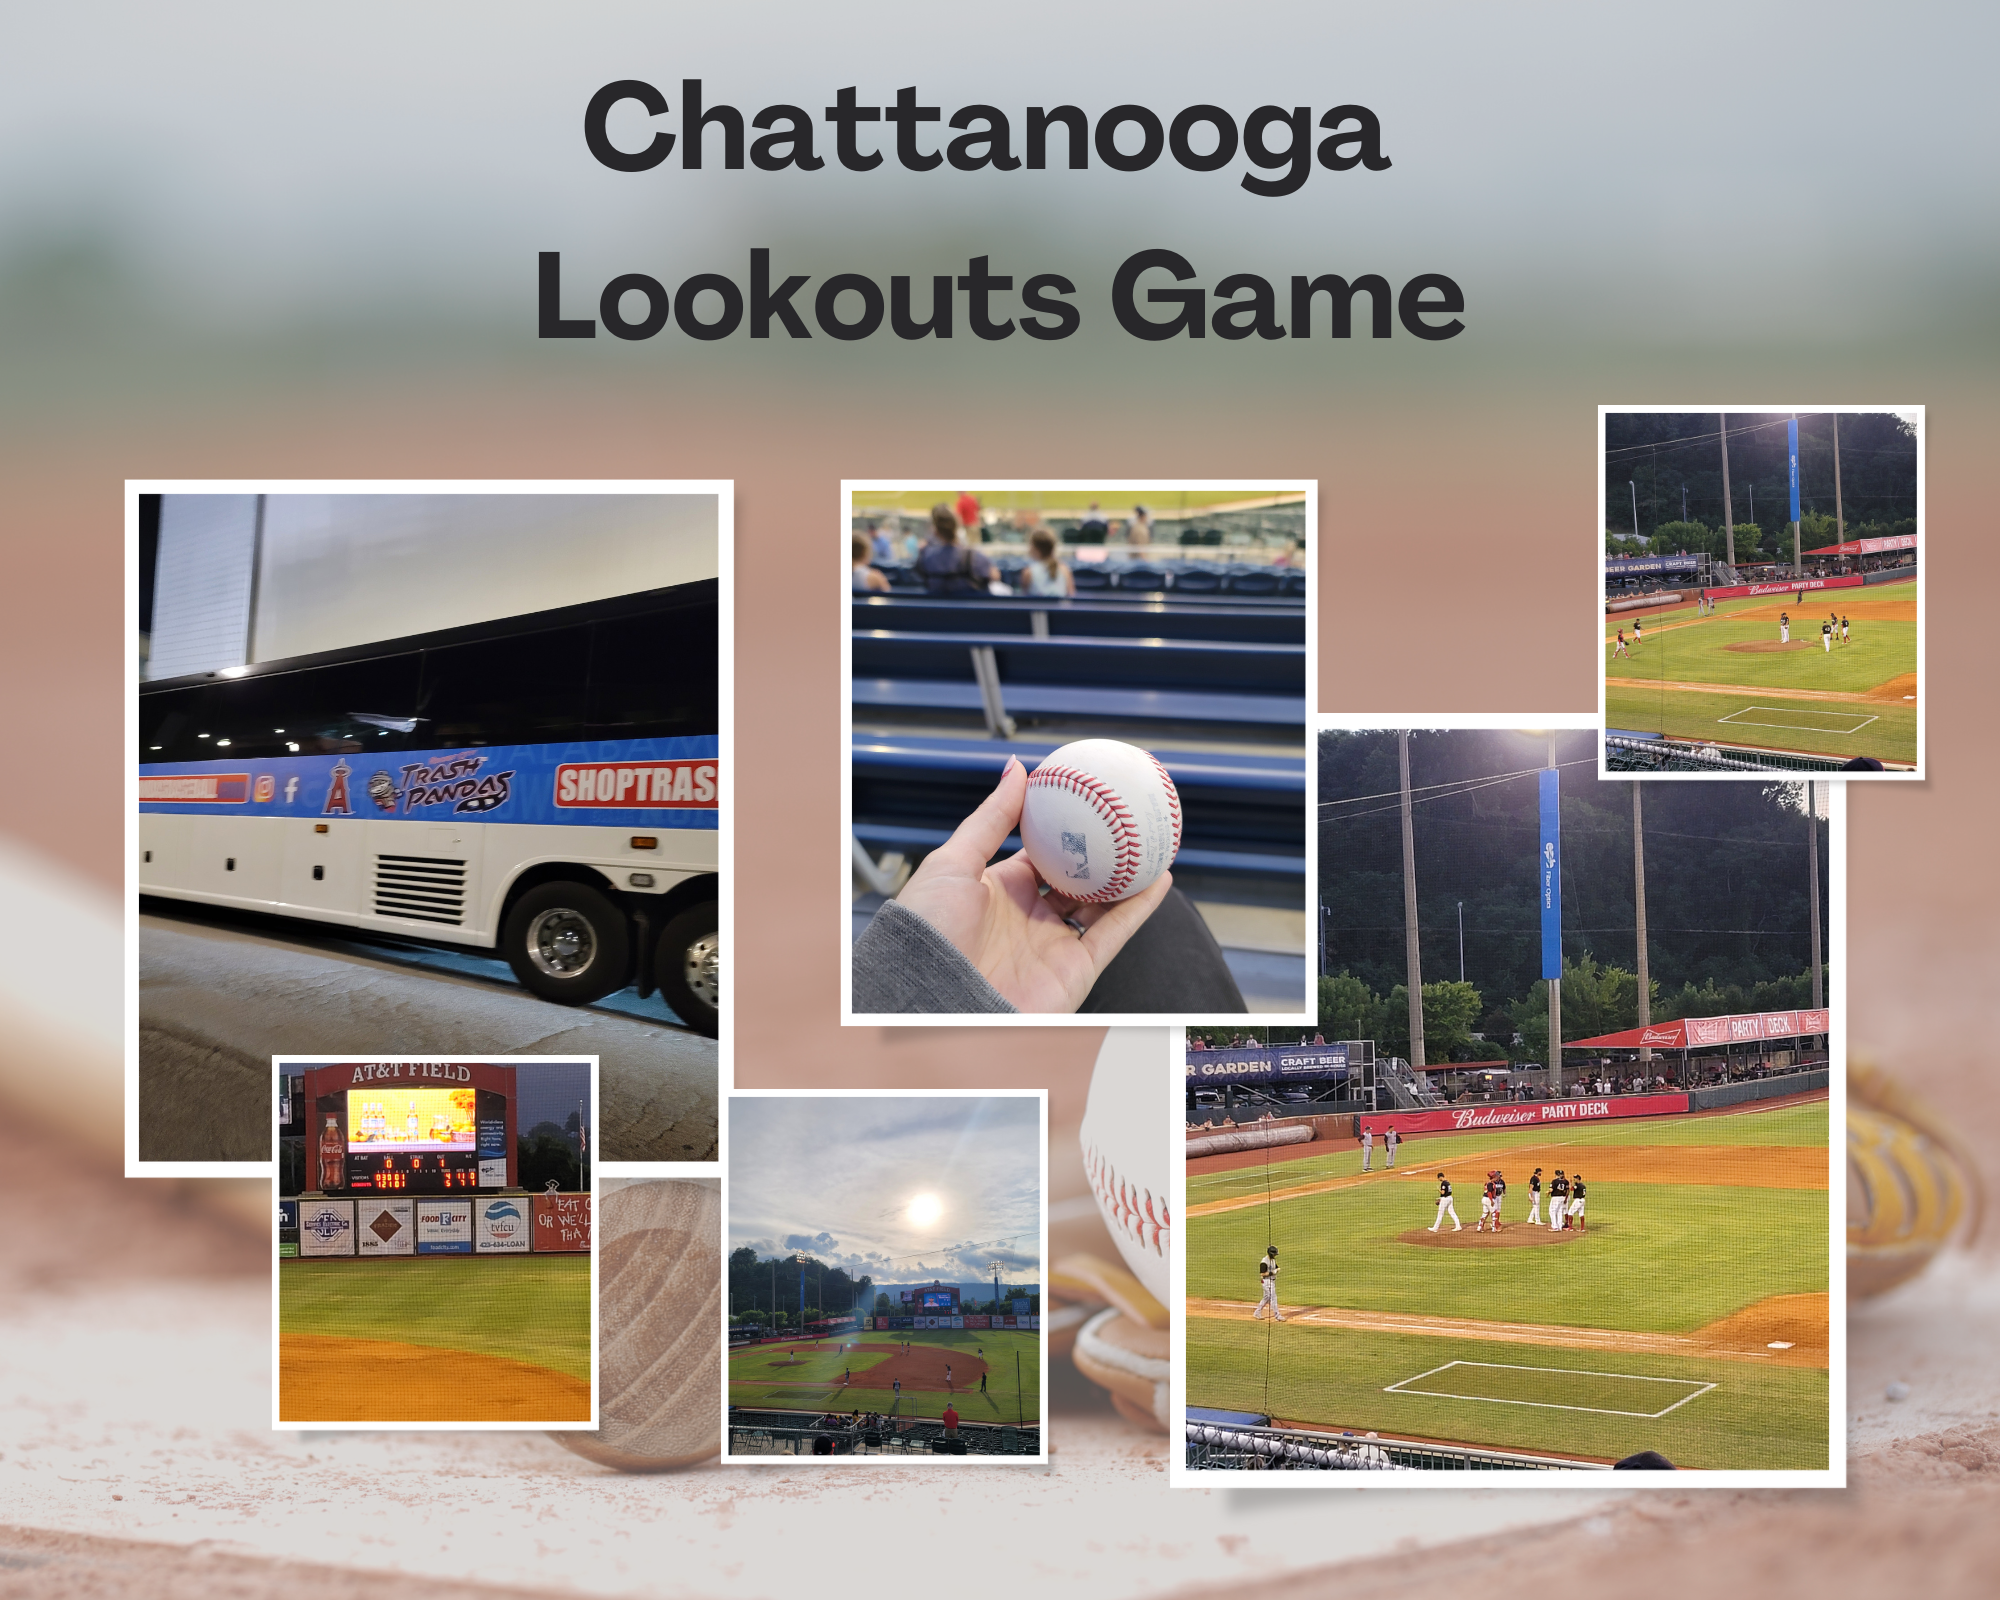 Chattanooga Lookouts Game